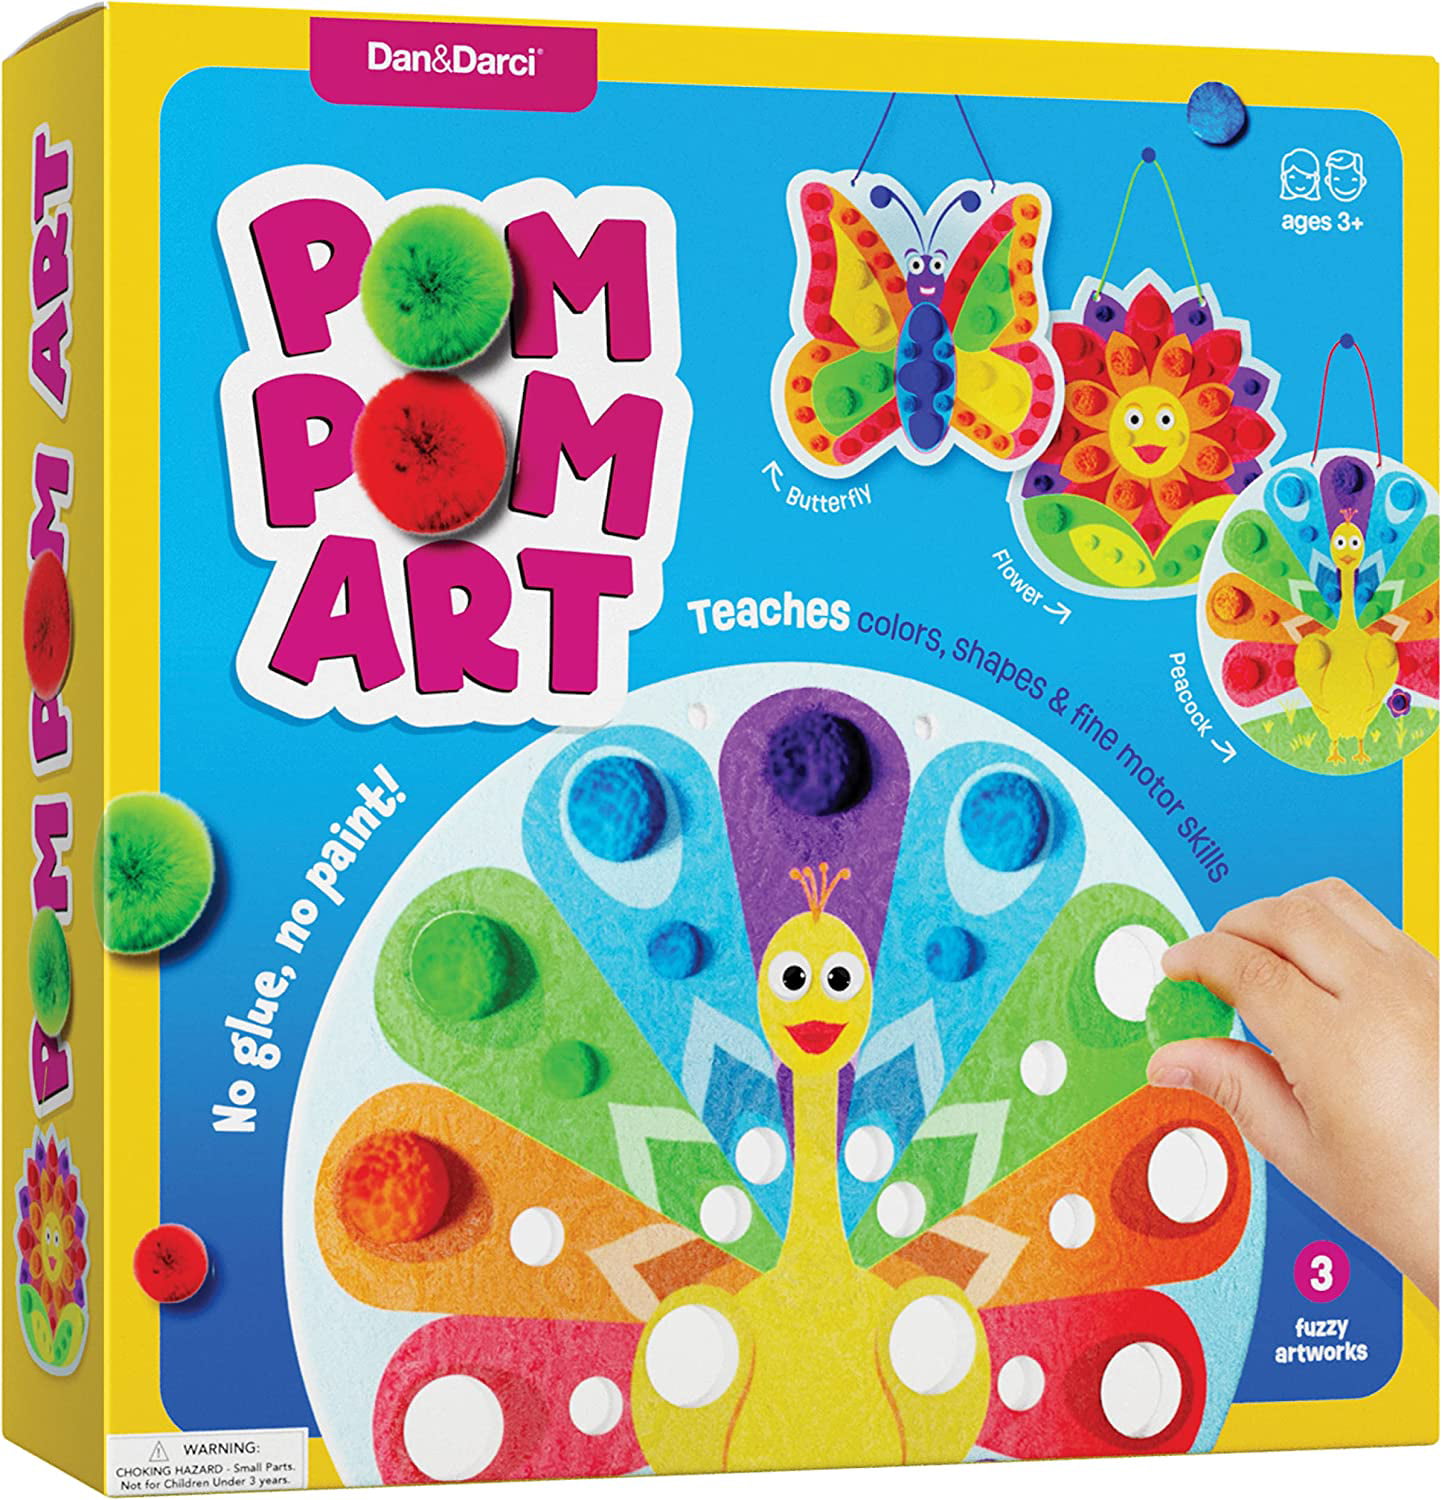 LOCATAL Arts and Crafts for Kids Ages 3, 4, 5, 6, 7, 8 Years Old,Fun  Toddler Craft Box with 24 Different Patterns Art Activities Projects for